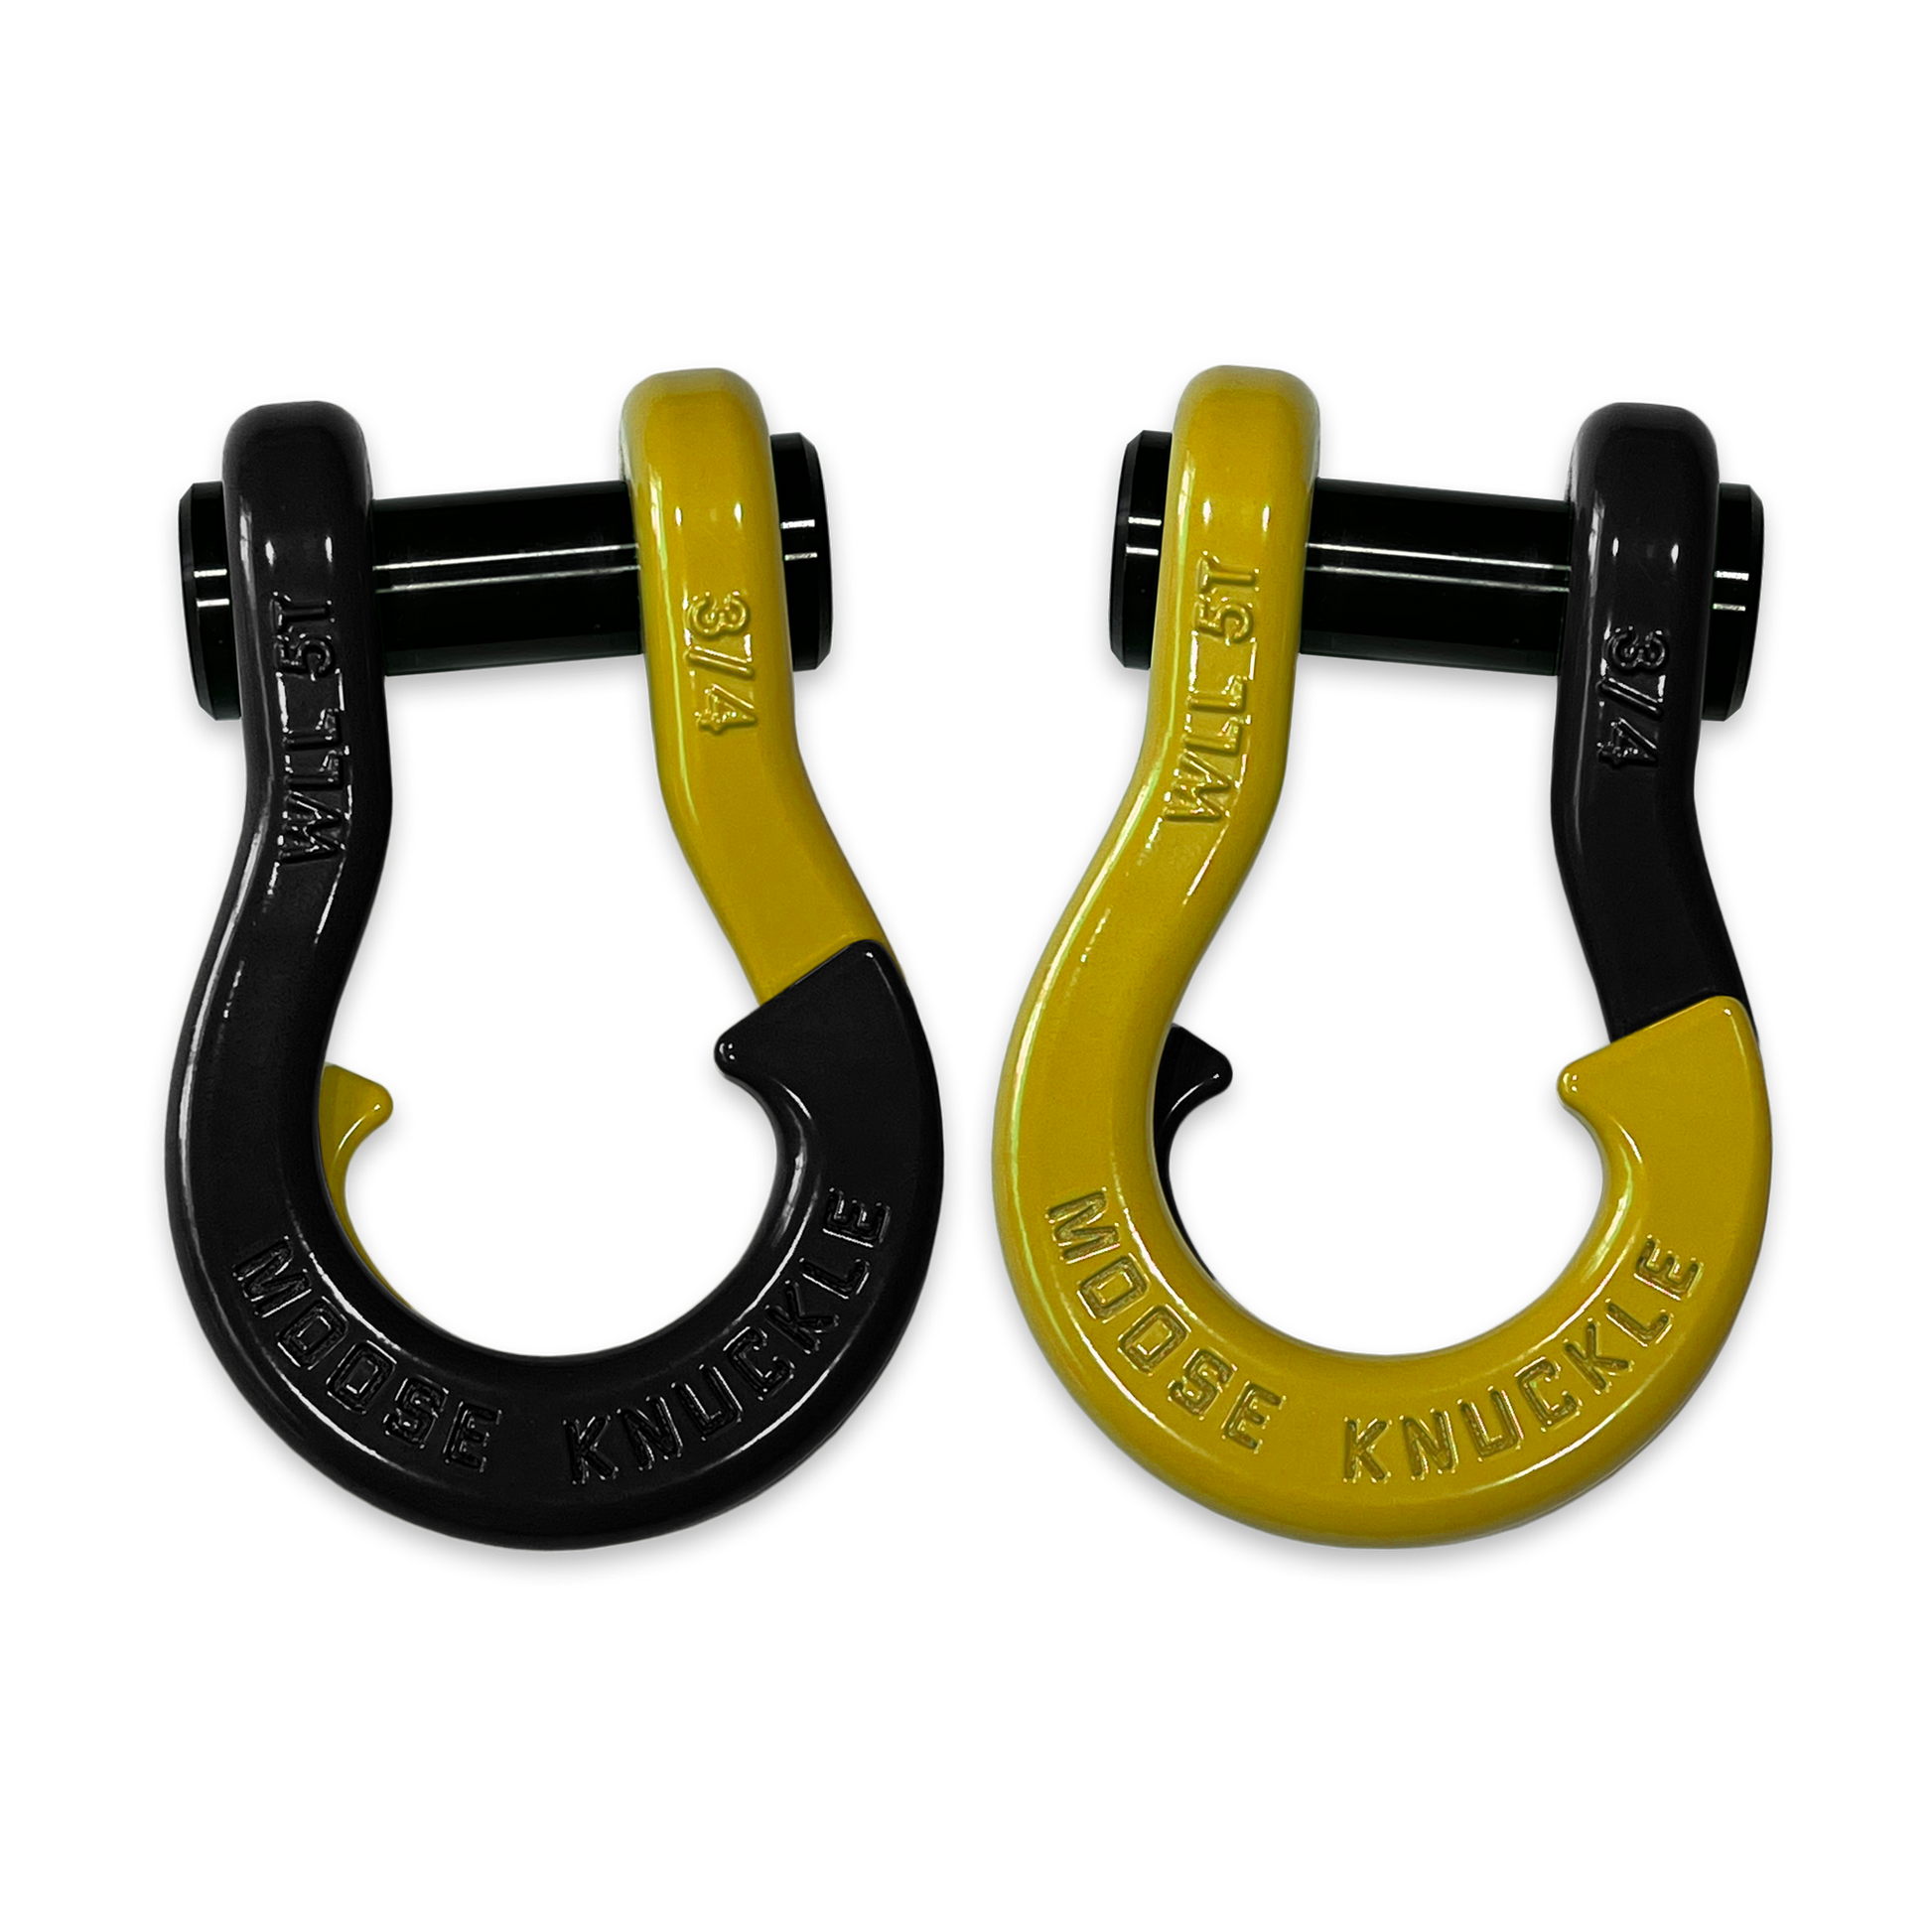 Moose Knuckle's Jowl Recovery Split Shackle 3/4 in Black Hole and Detonator Yellow Combo